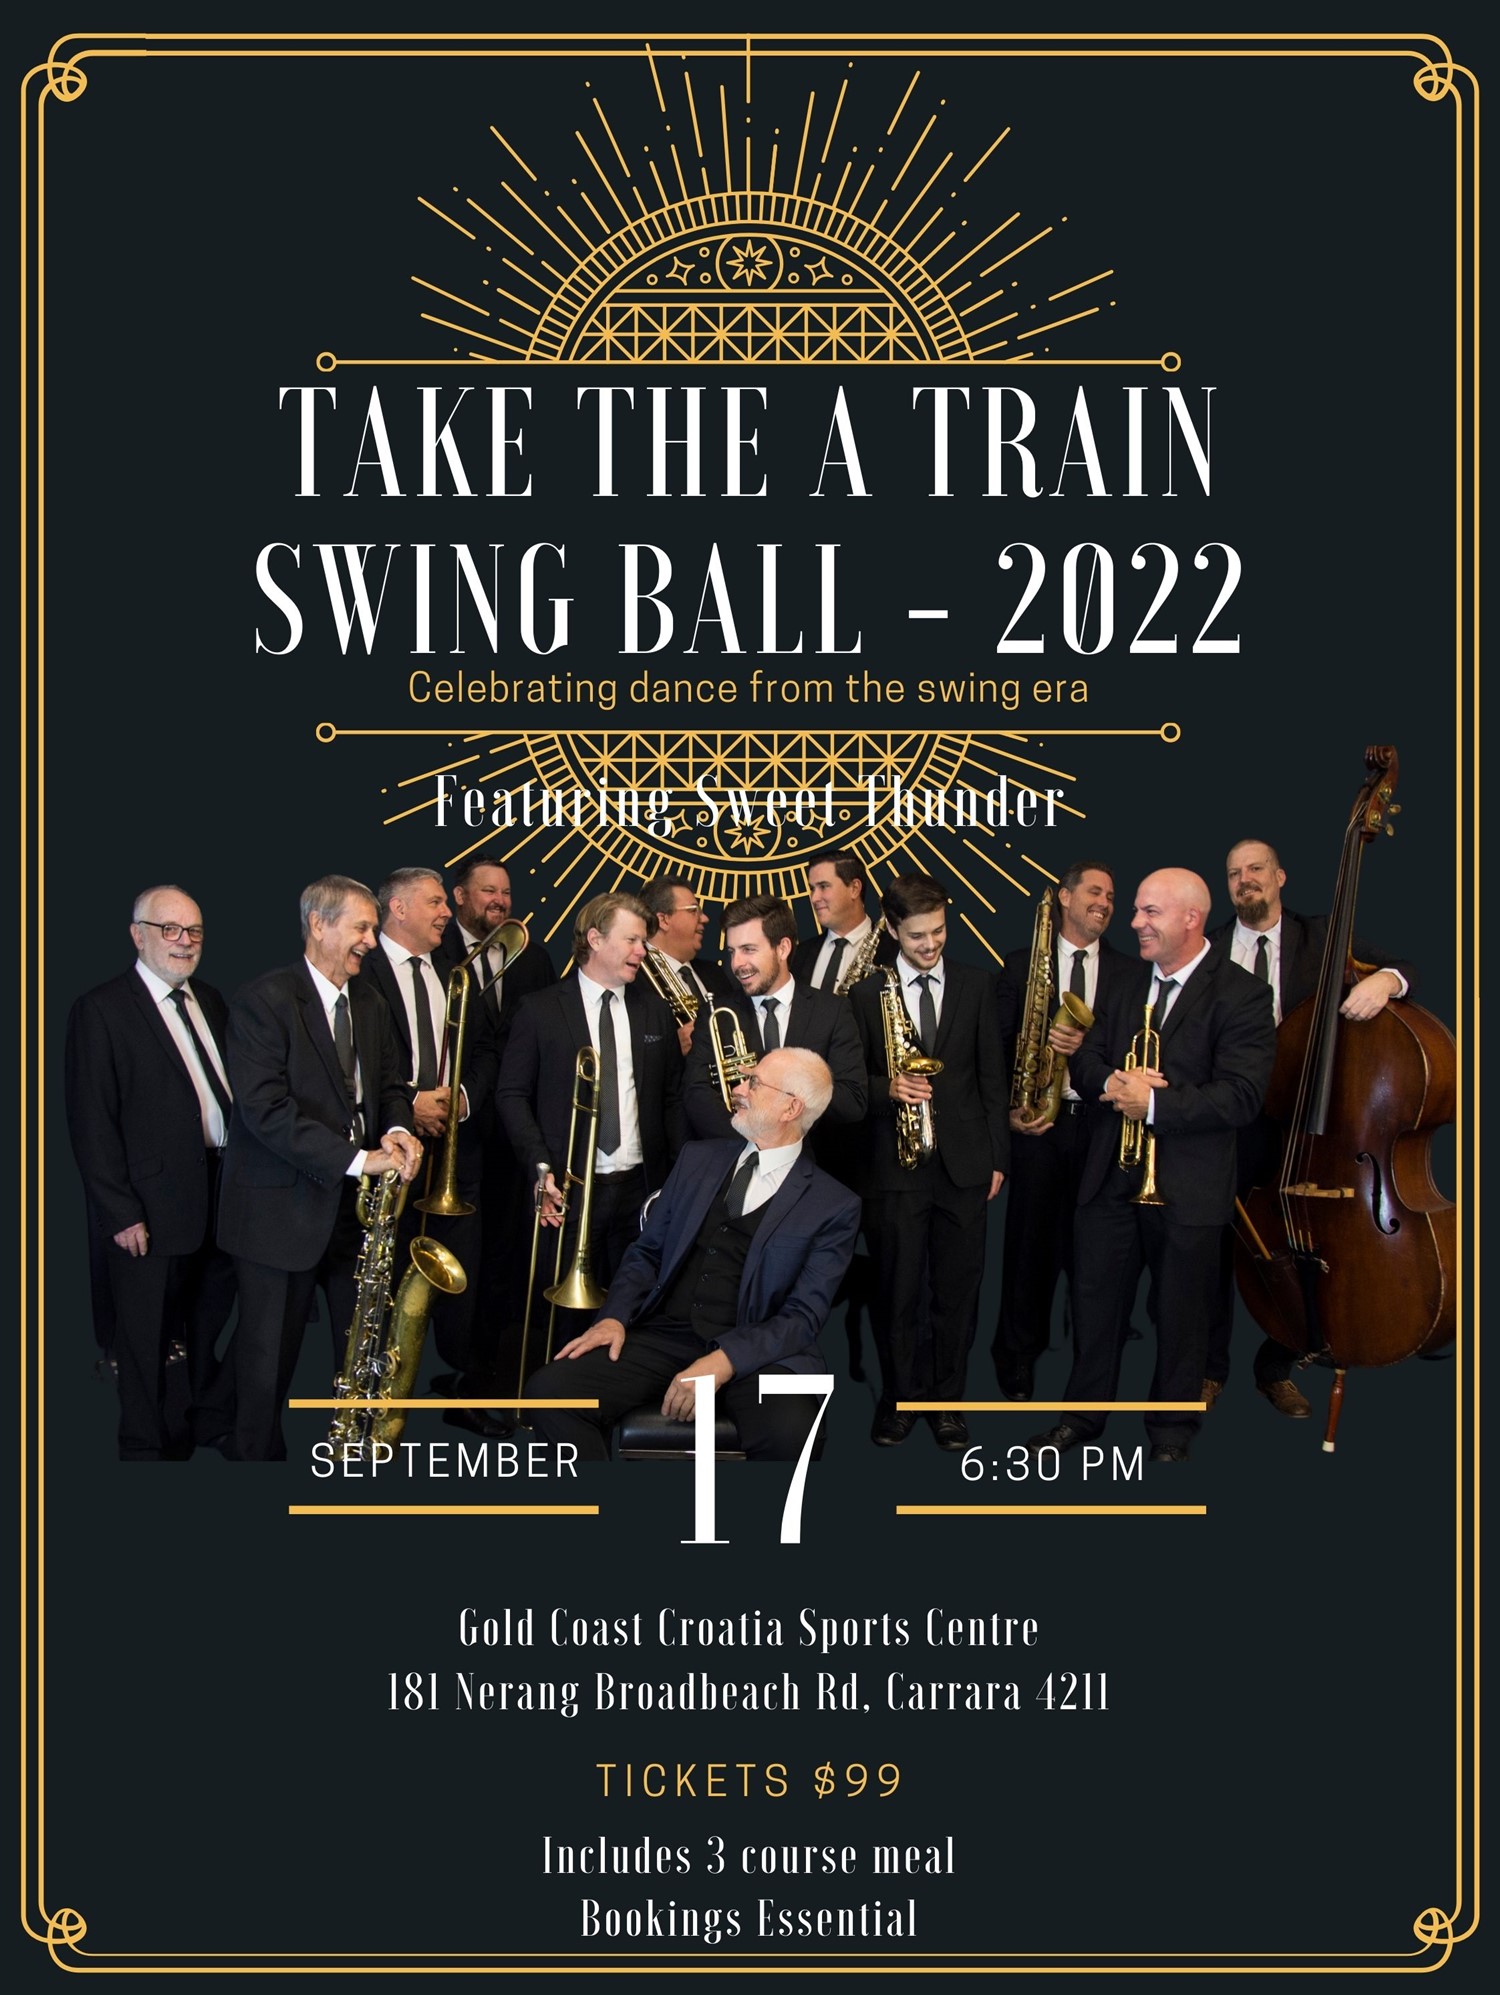 Take the A Train Swing Ball  on Sep 17, 18:30@Gold Coast Croatian Sports Centre - Pick a seat, Buy tickets and Get information on  